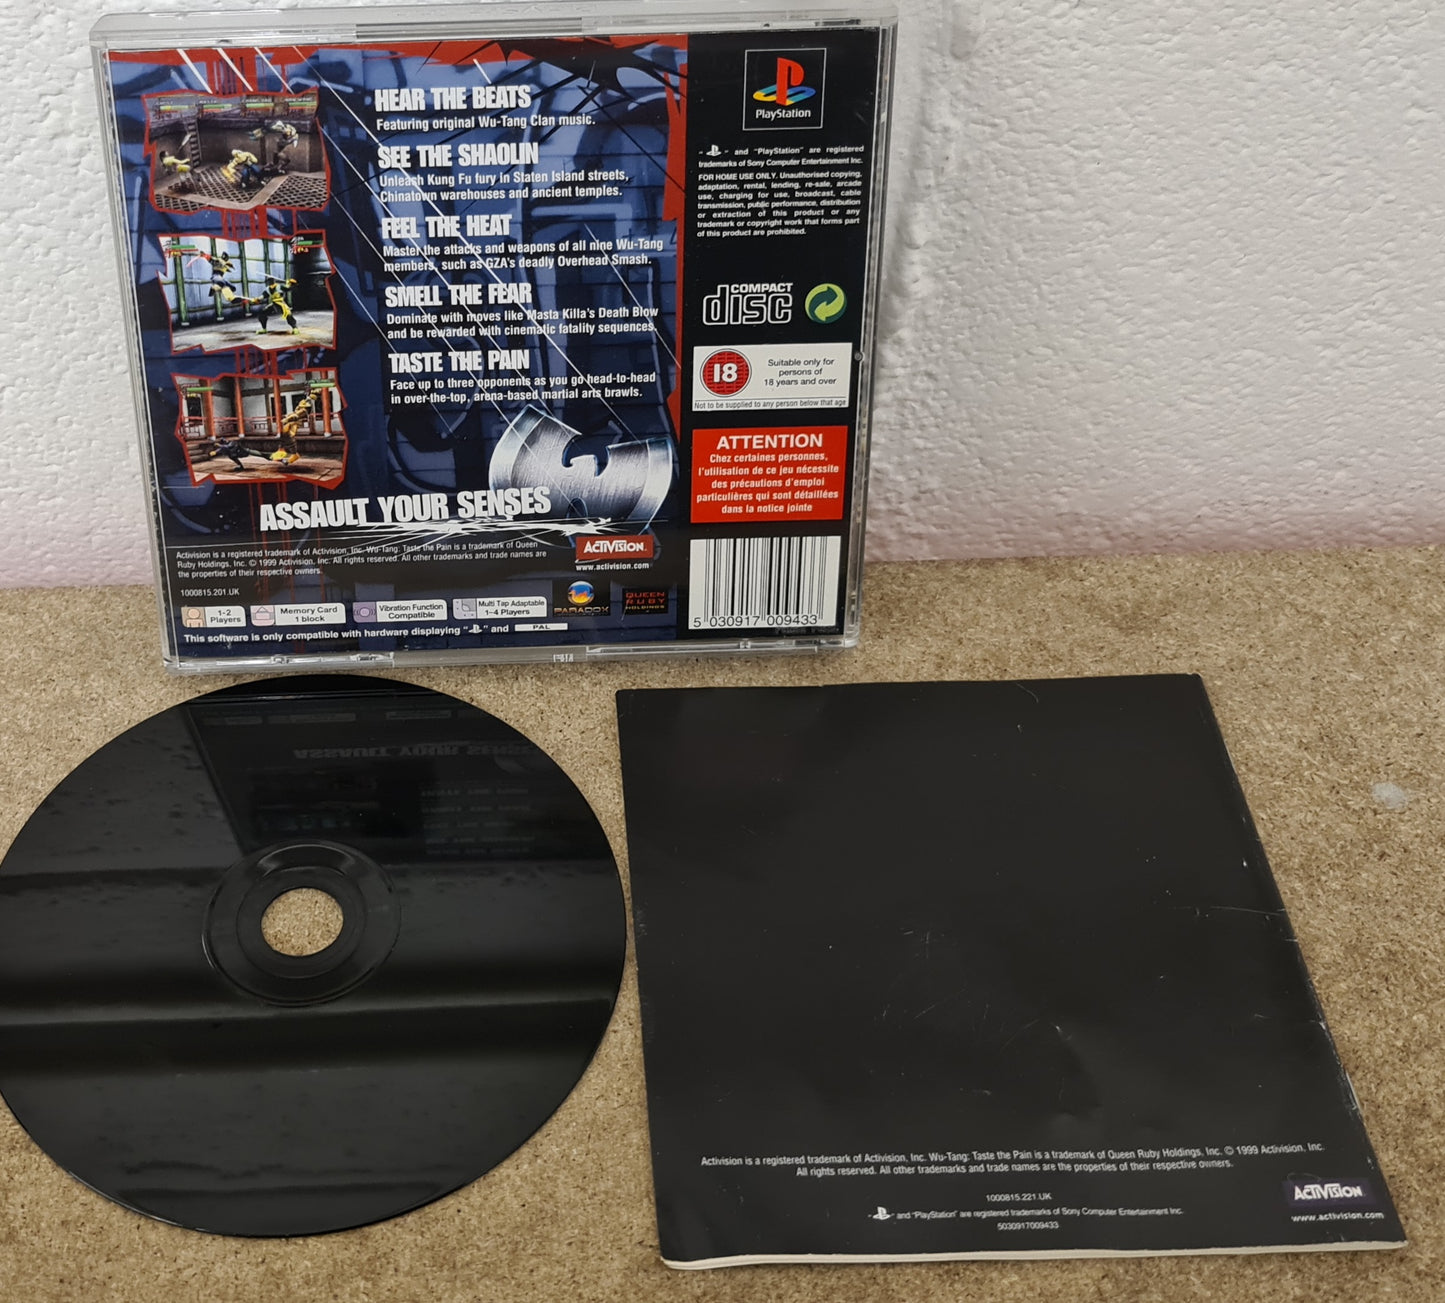 Wu-Tang Taste the Pain Sony Playstation 1 (PS1) Game